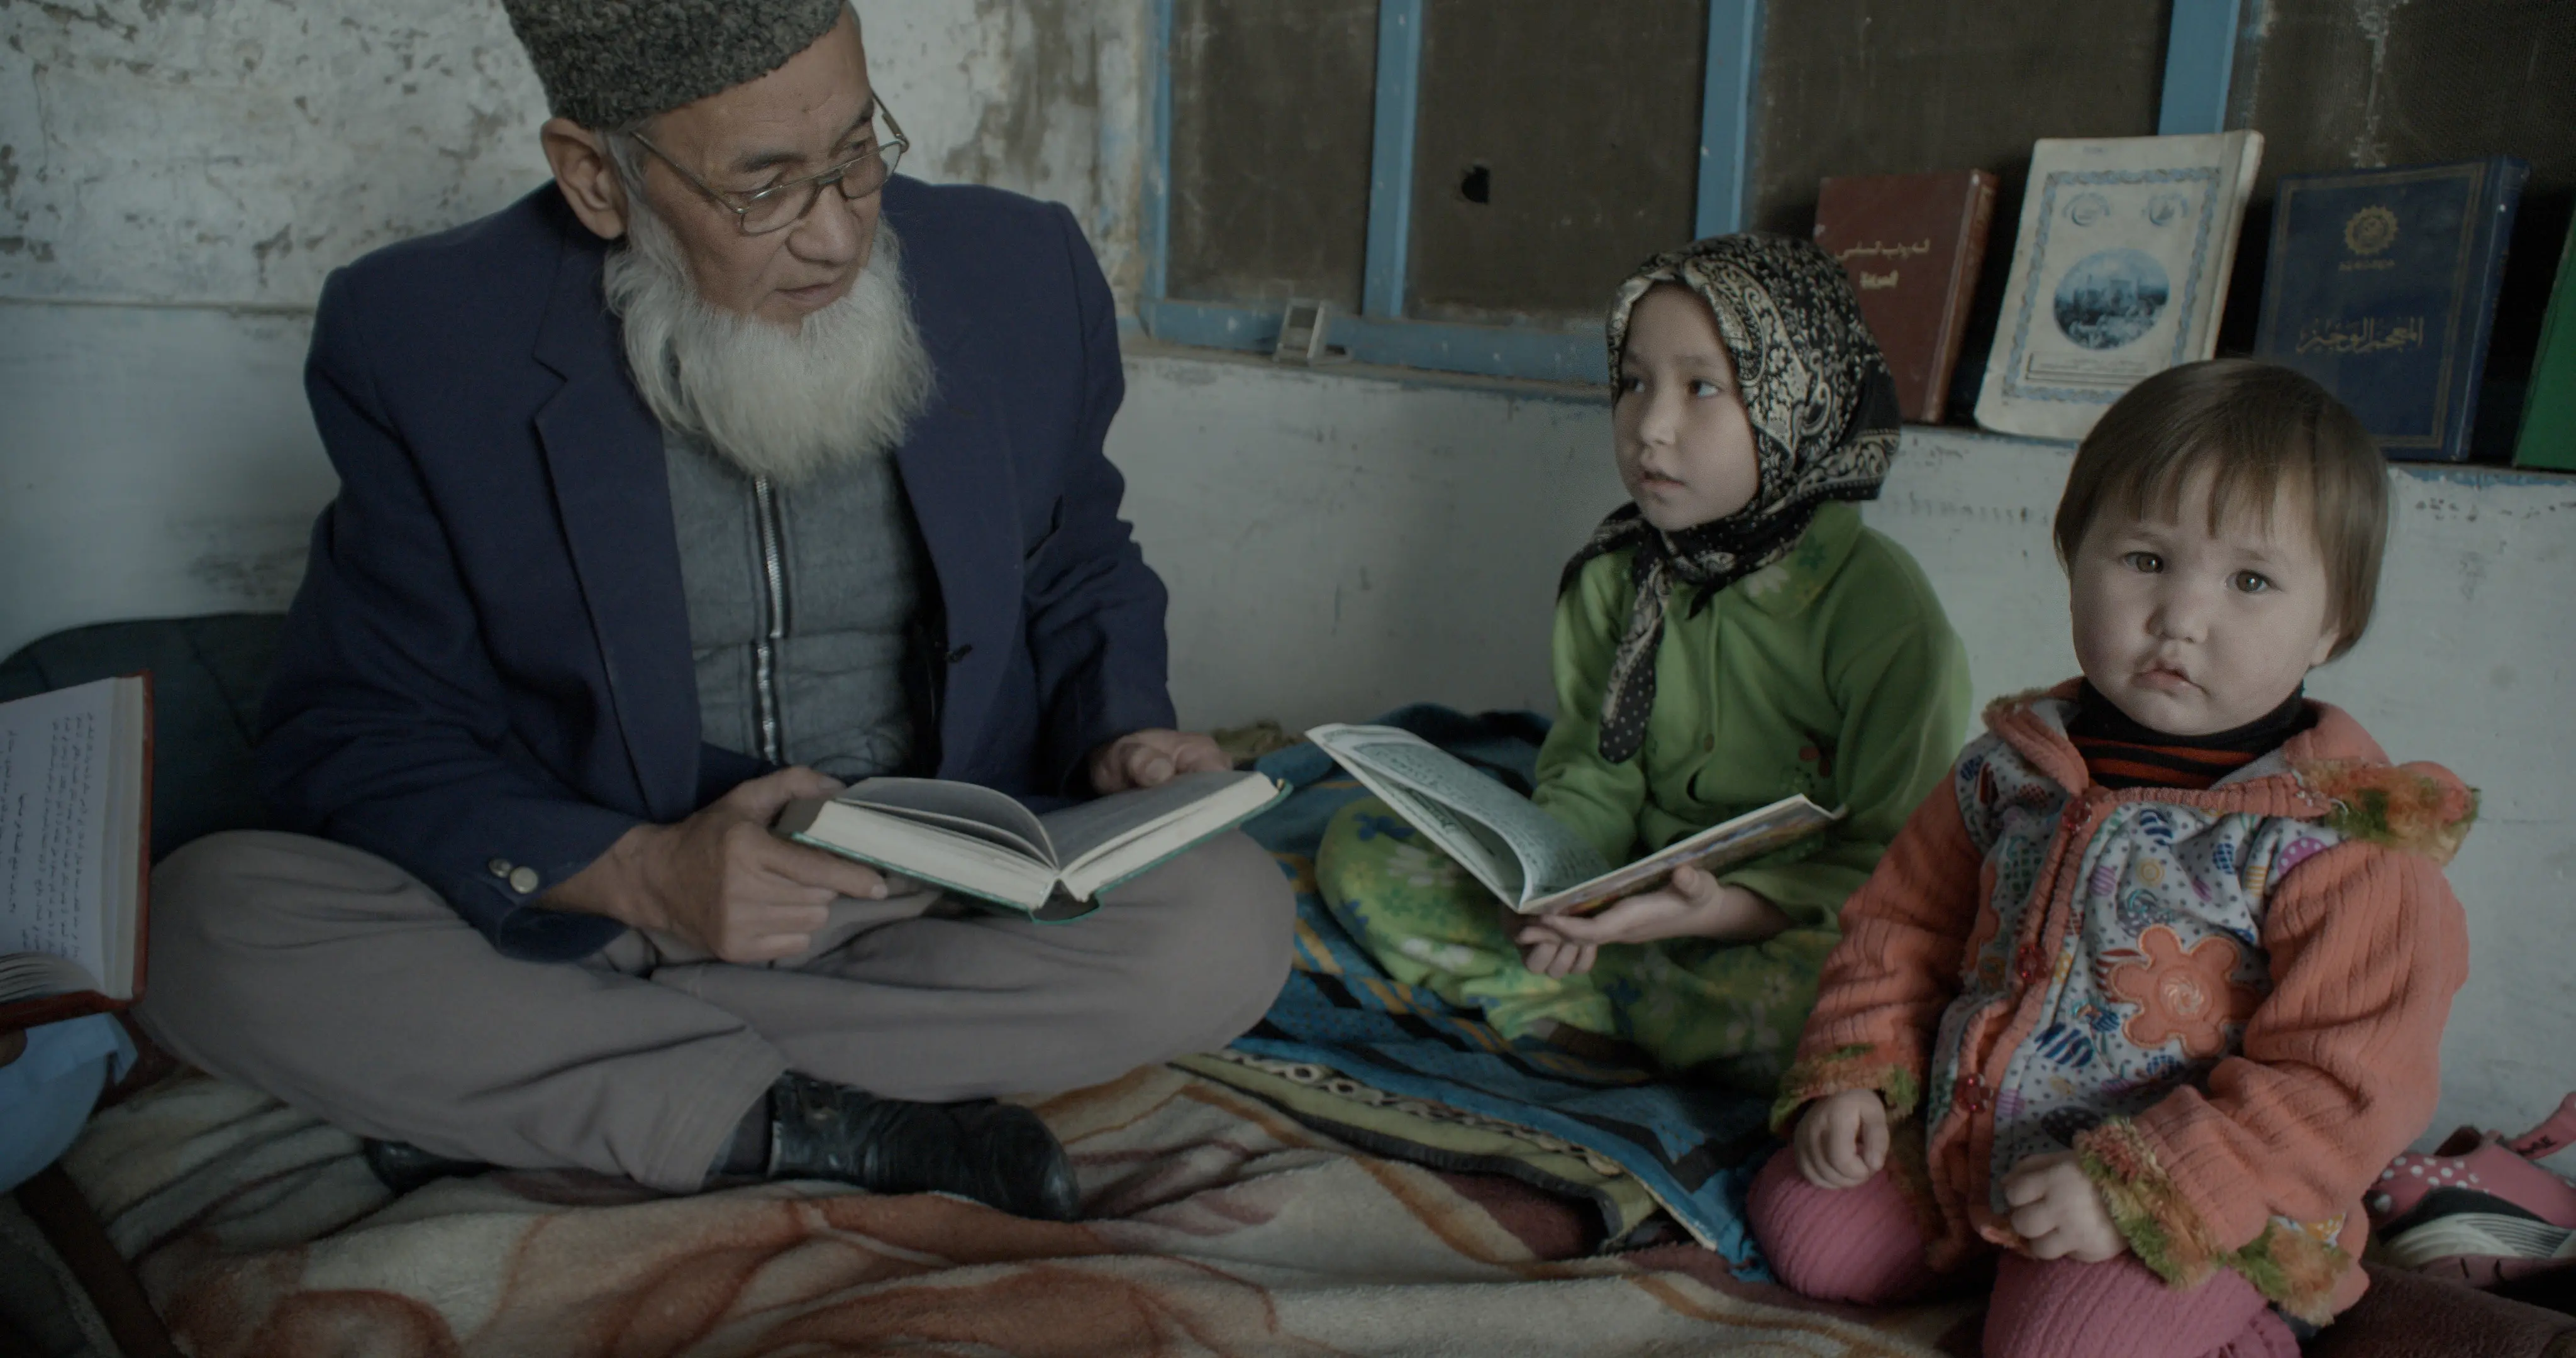 Niaz Ghafoor and two children sit with books.